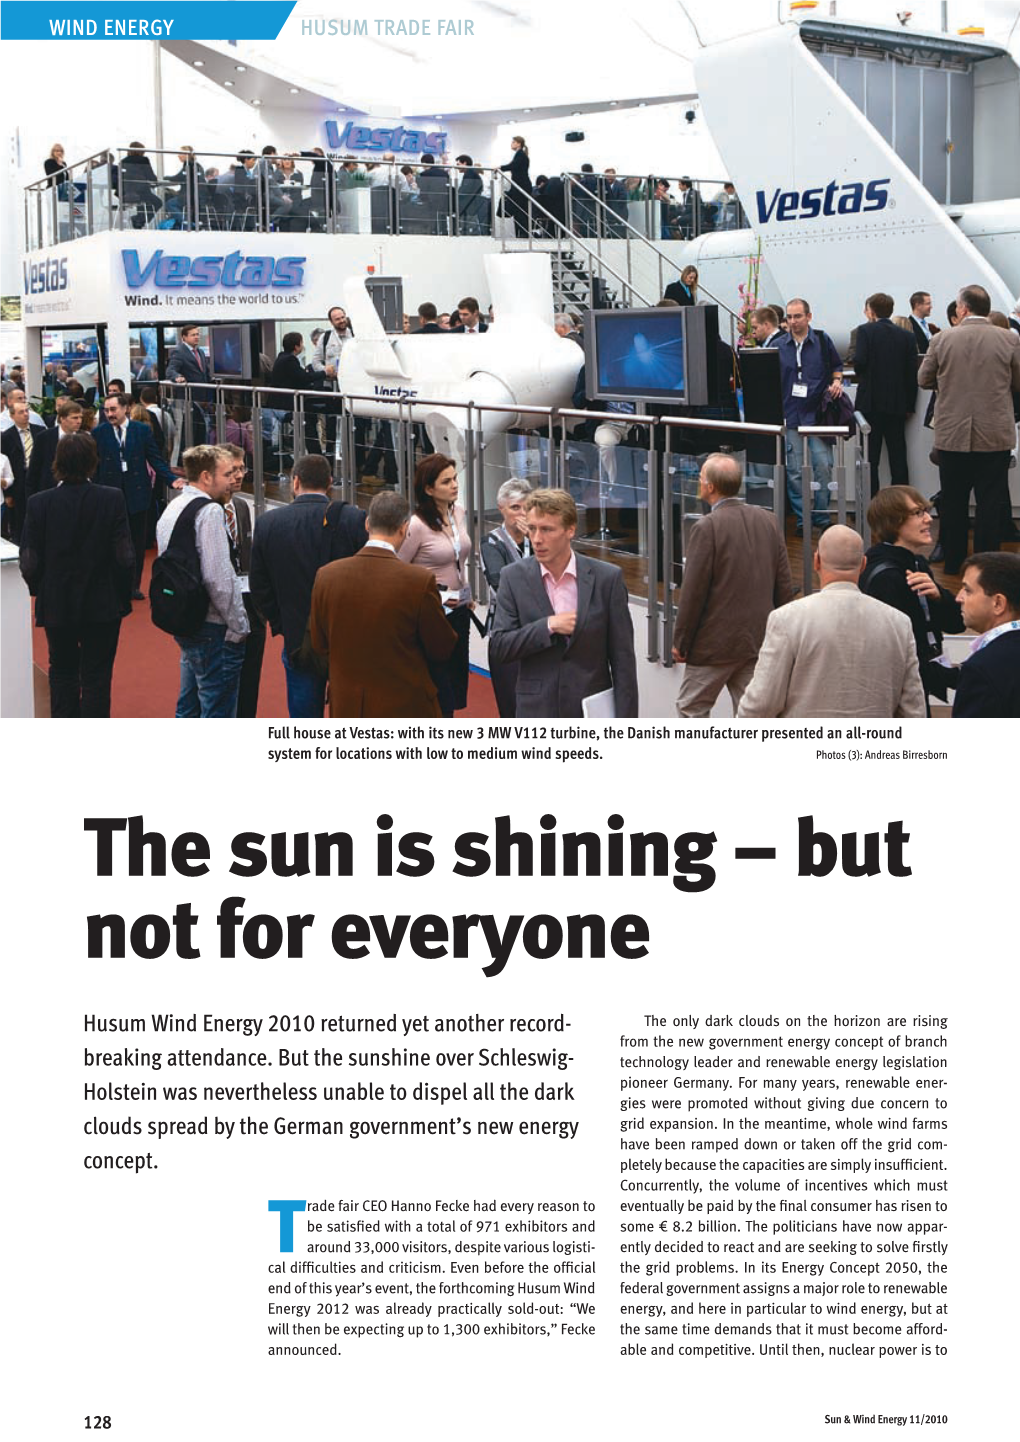 The Sun Is Shining – but Not for Everyone